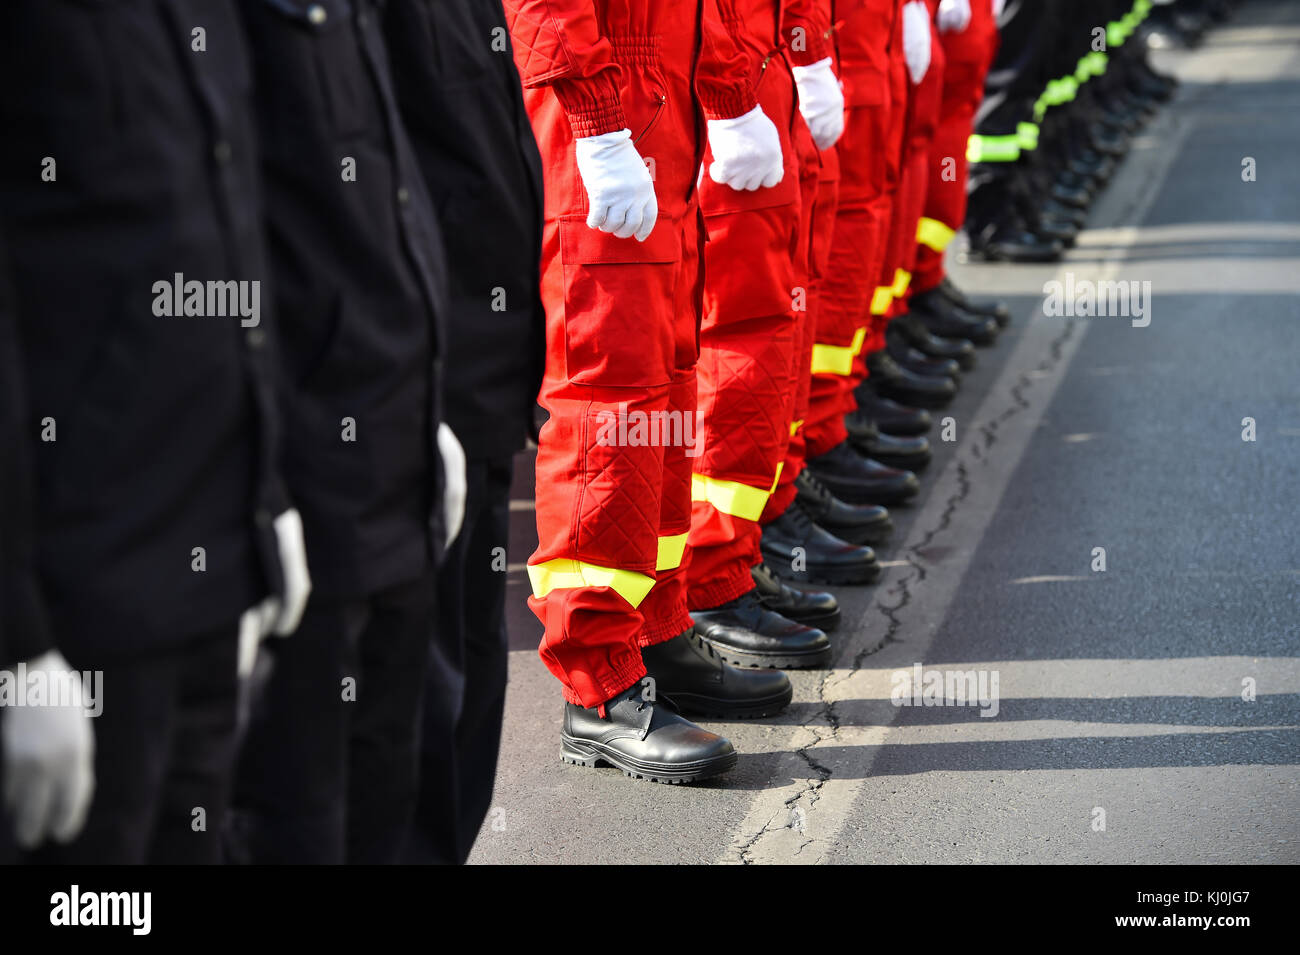 Soldiers from a national guard of honor during a military ceremony Stock Photo